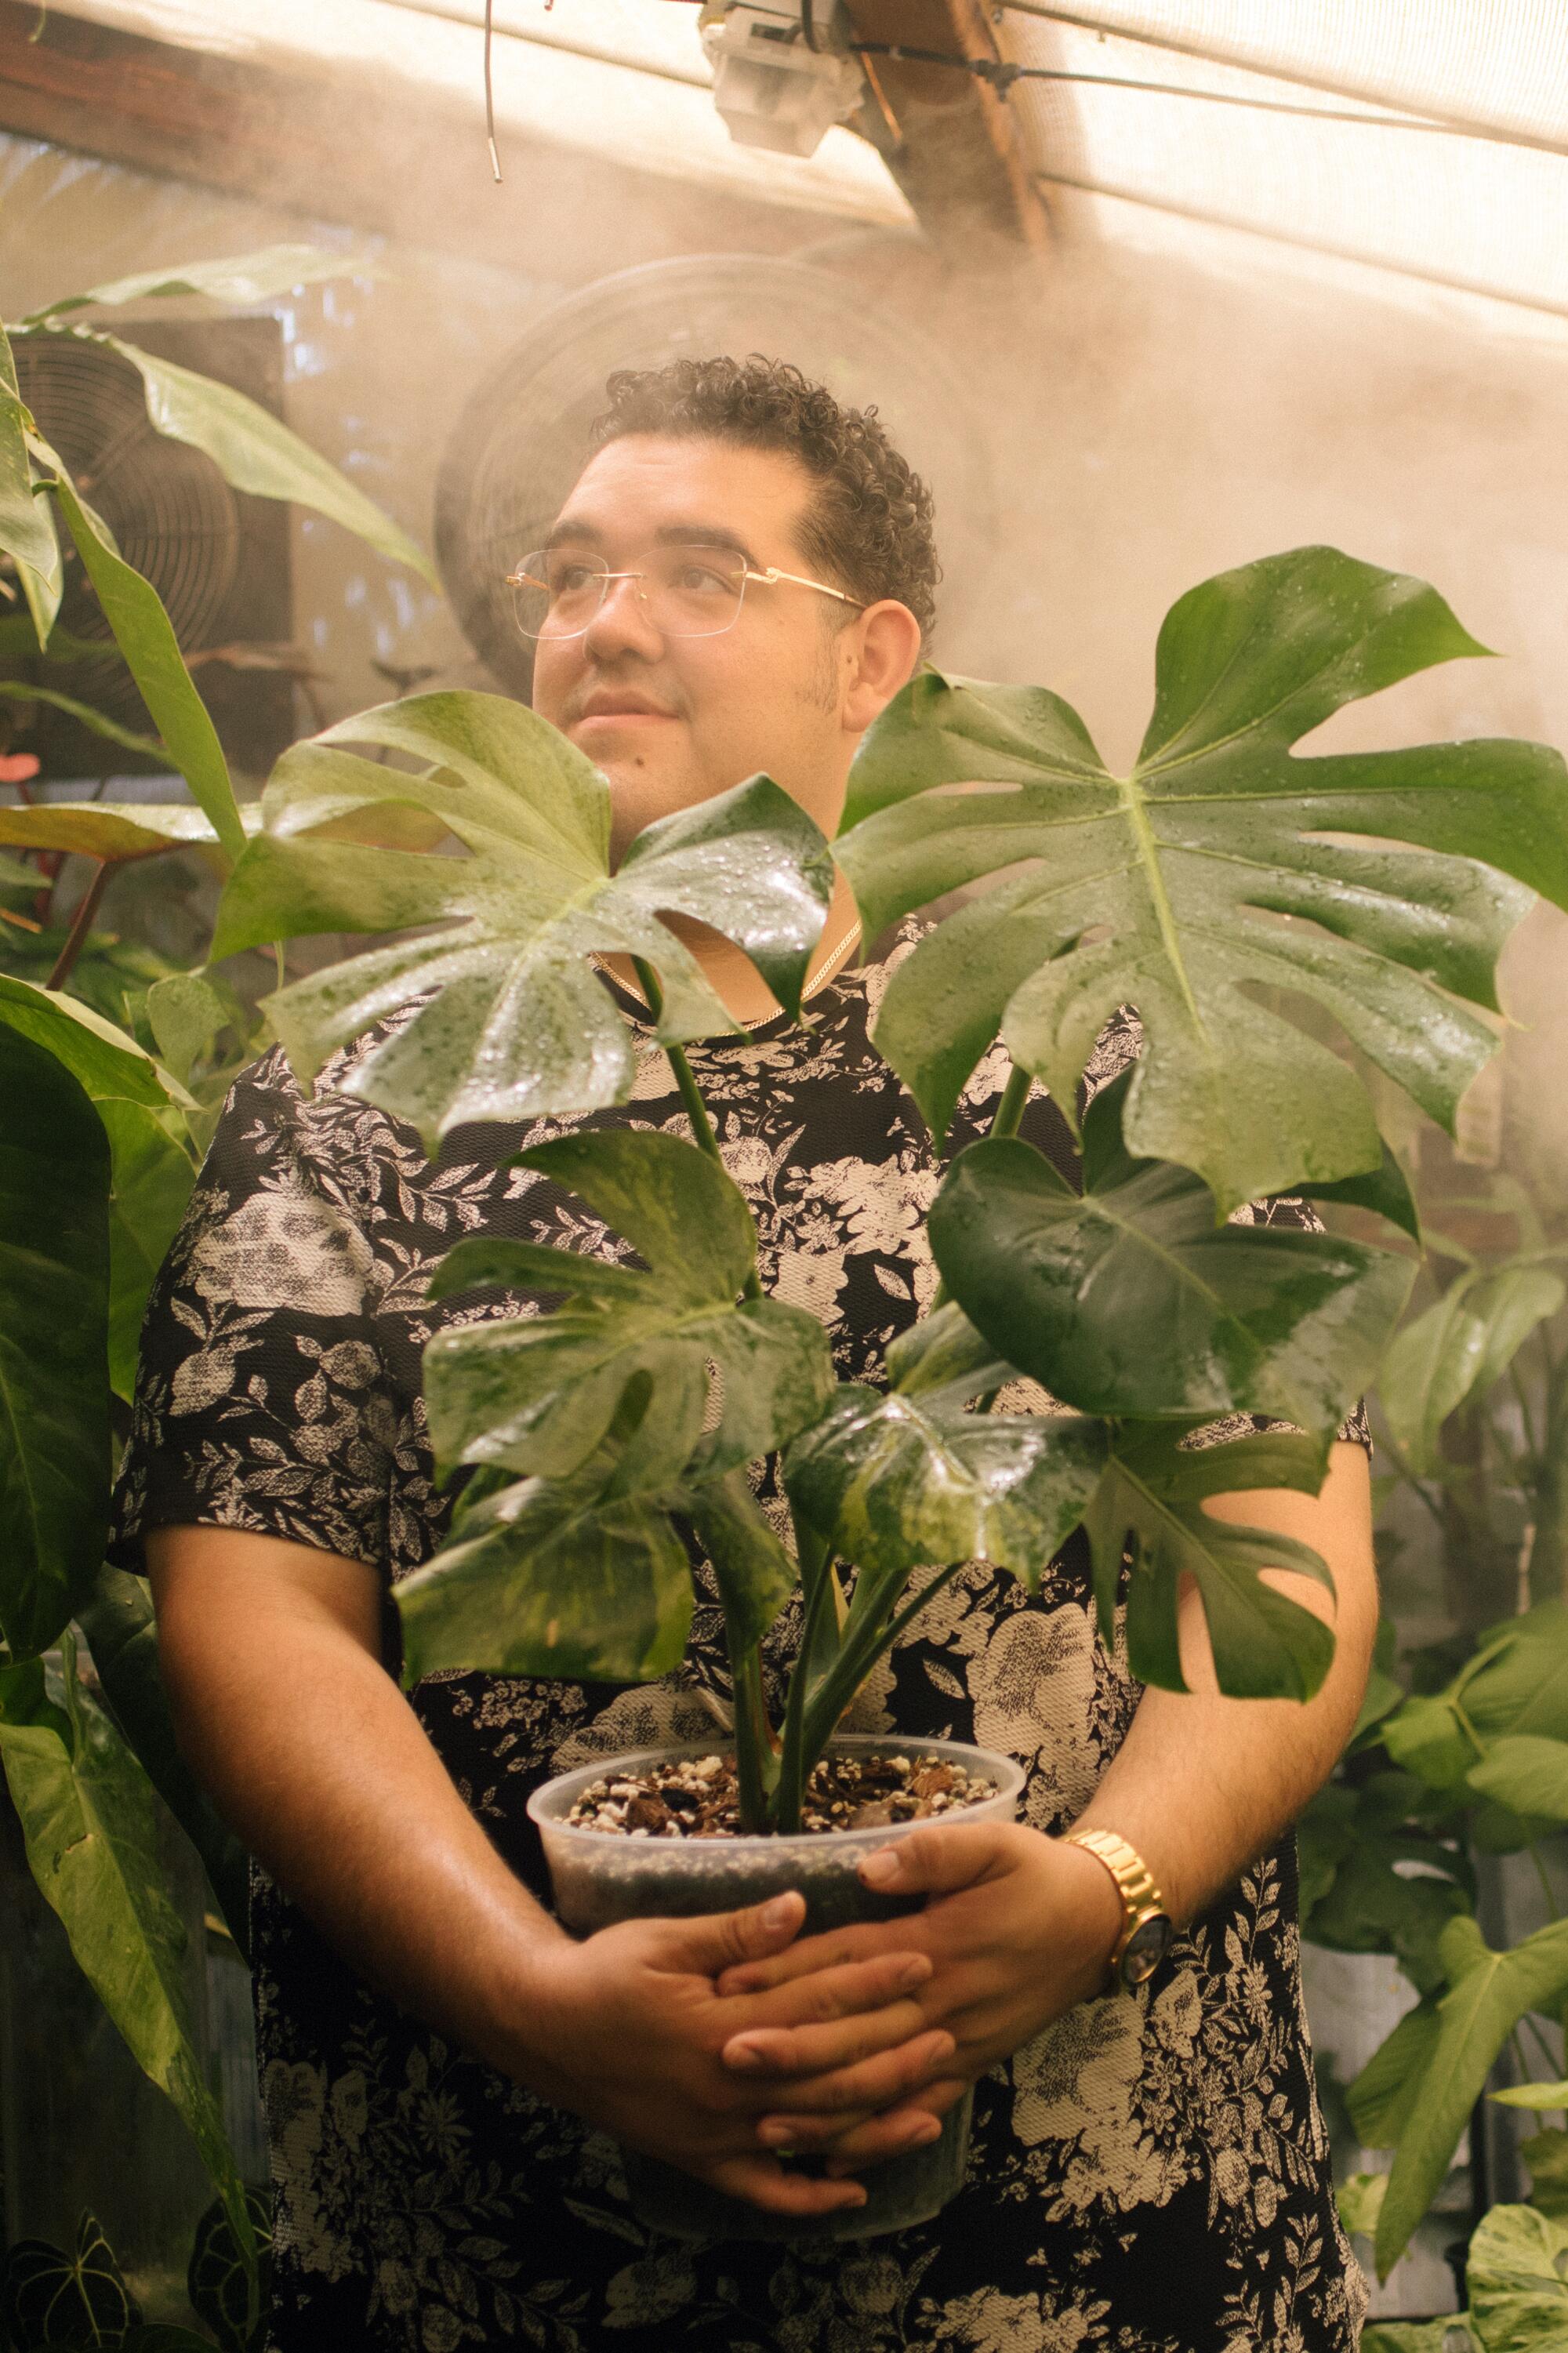 A young man stands in a greenhouse holding a leafy potted plant in his arms